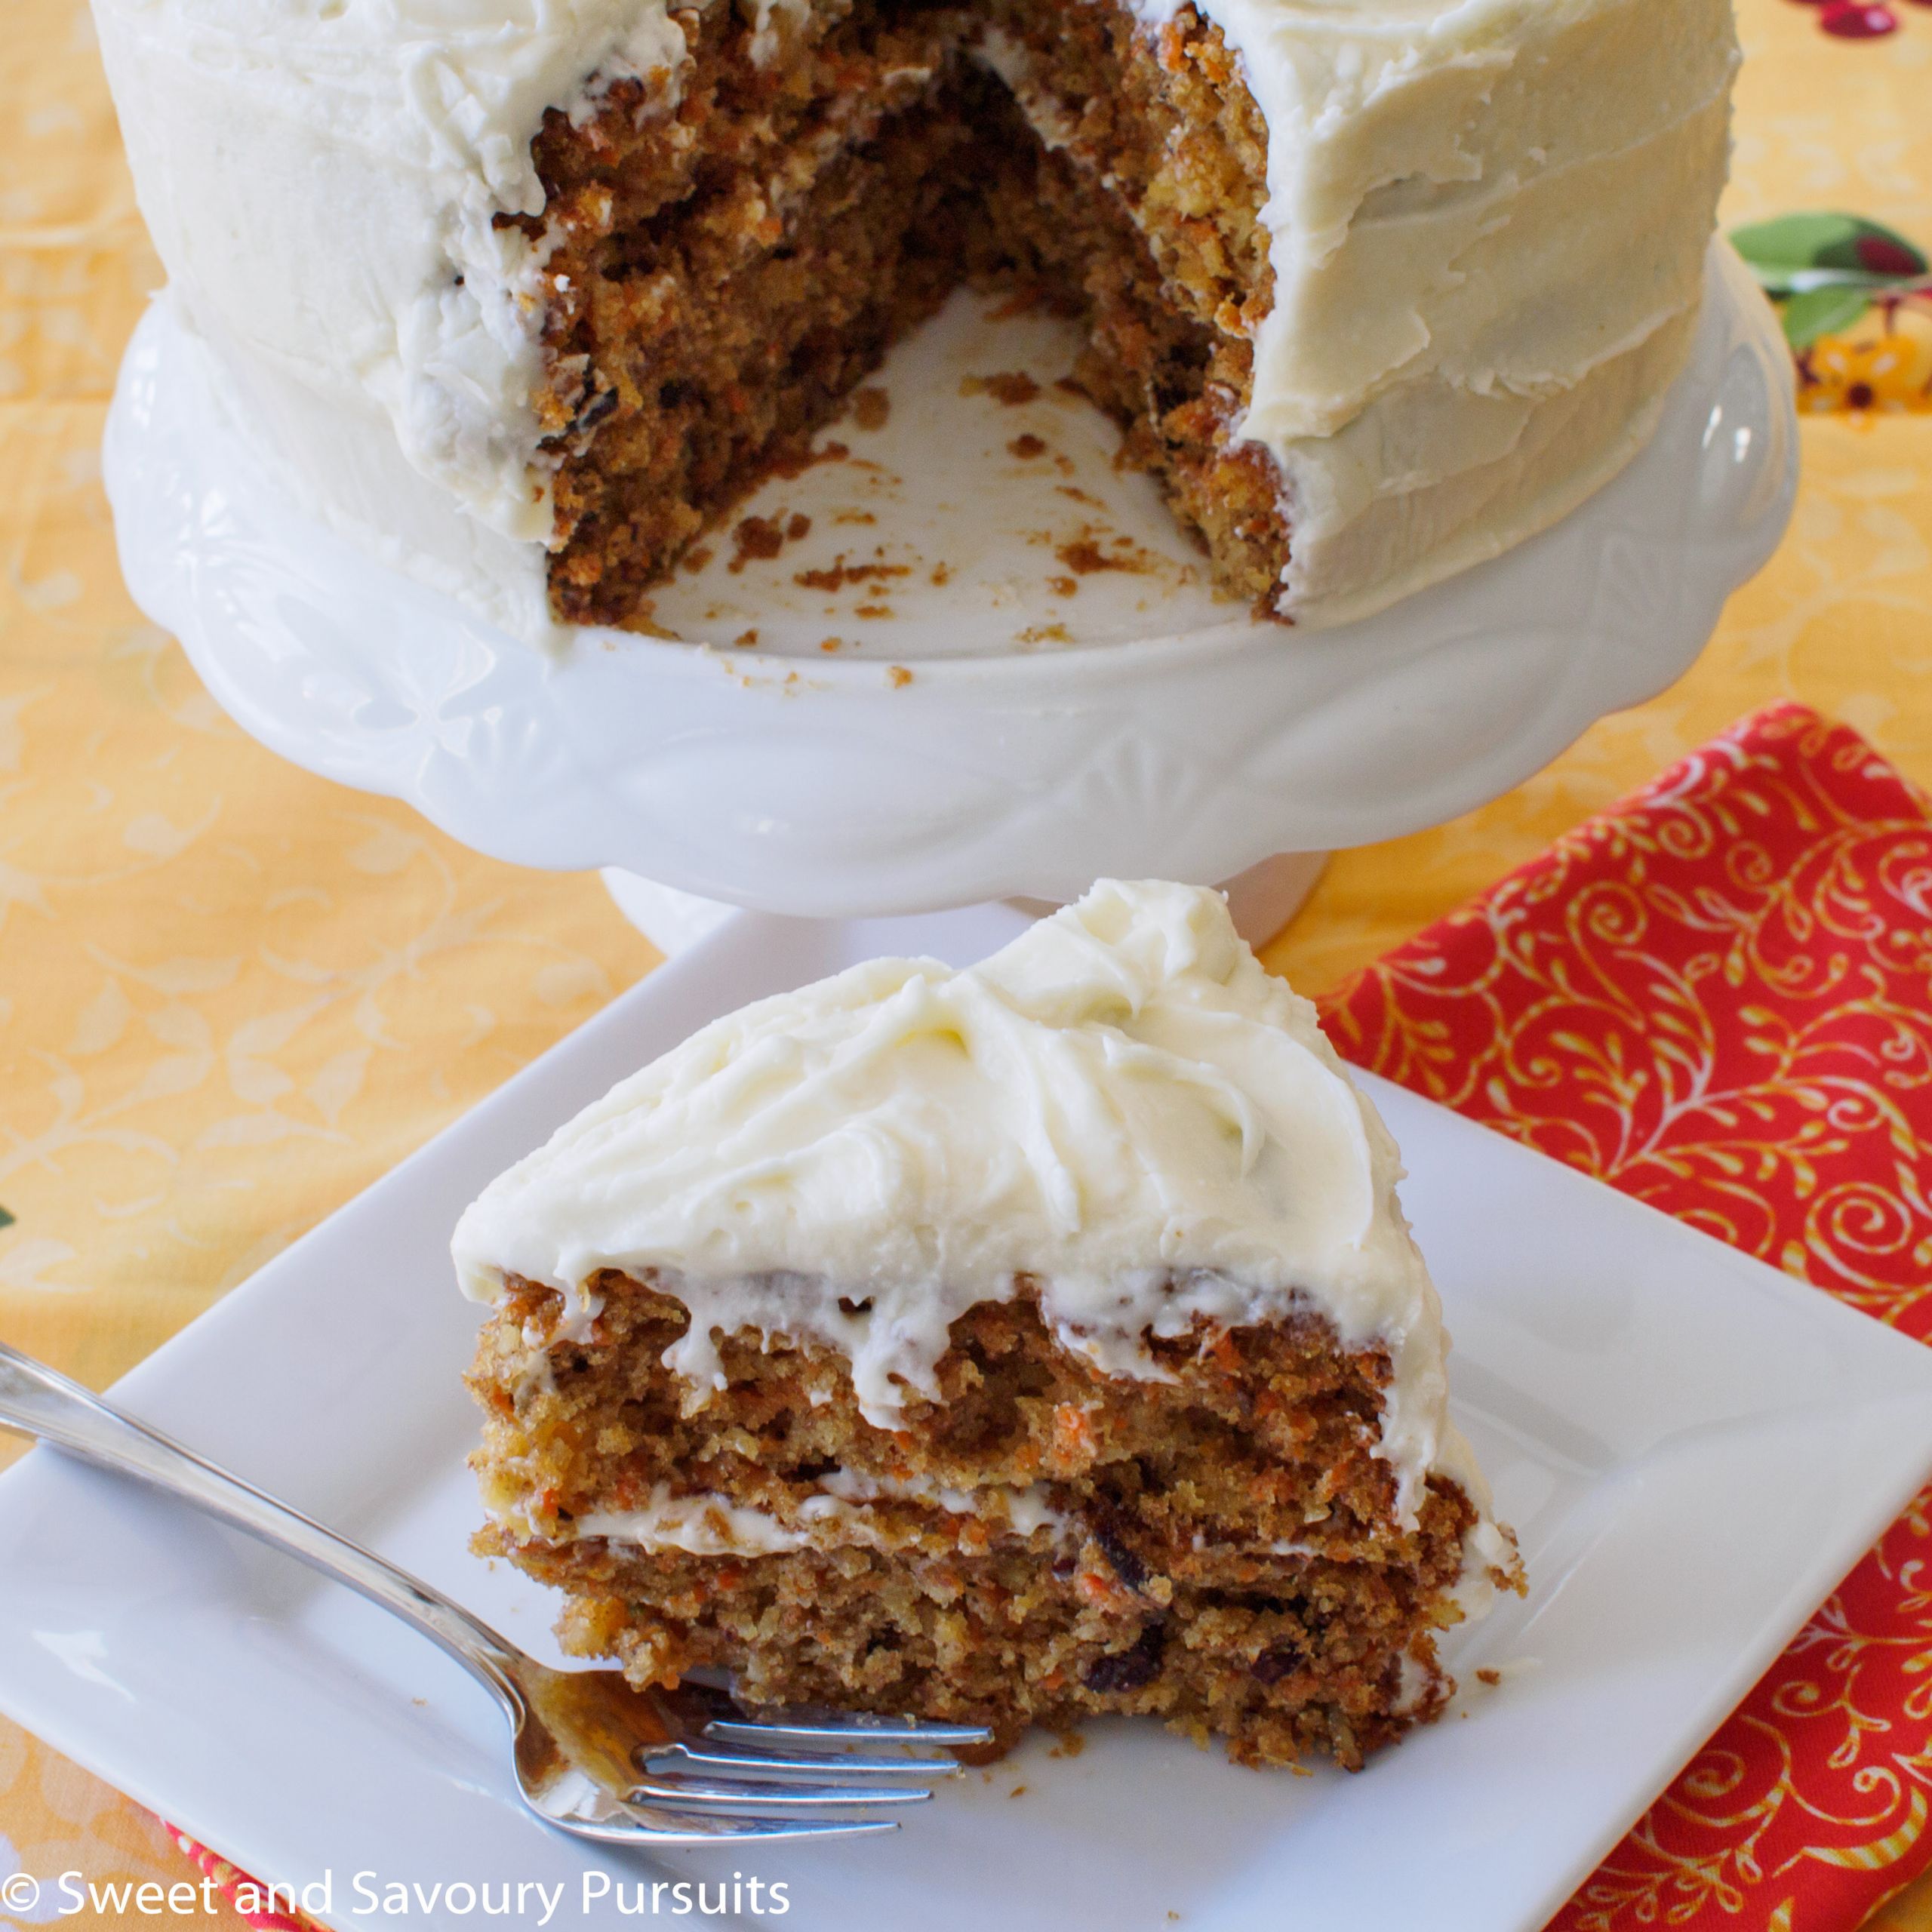 Carrot Cake Cream Cheese Frosting Awesome Carrot Cake with Cream Cheese Frosting – Sweet and Savoury